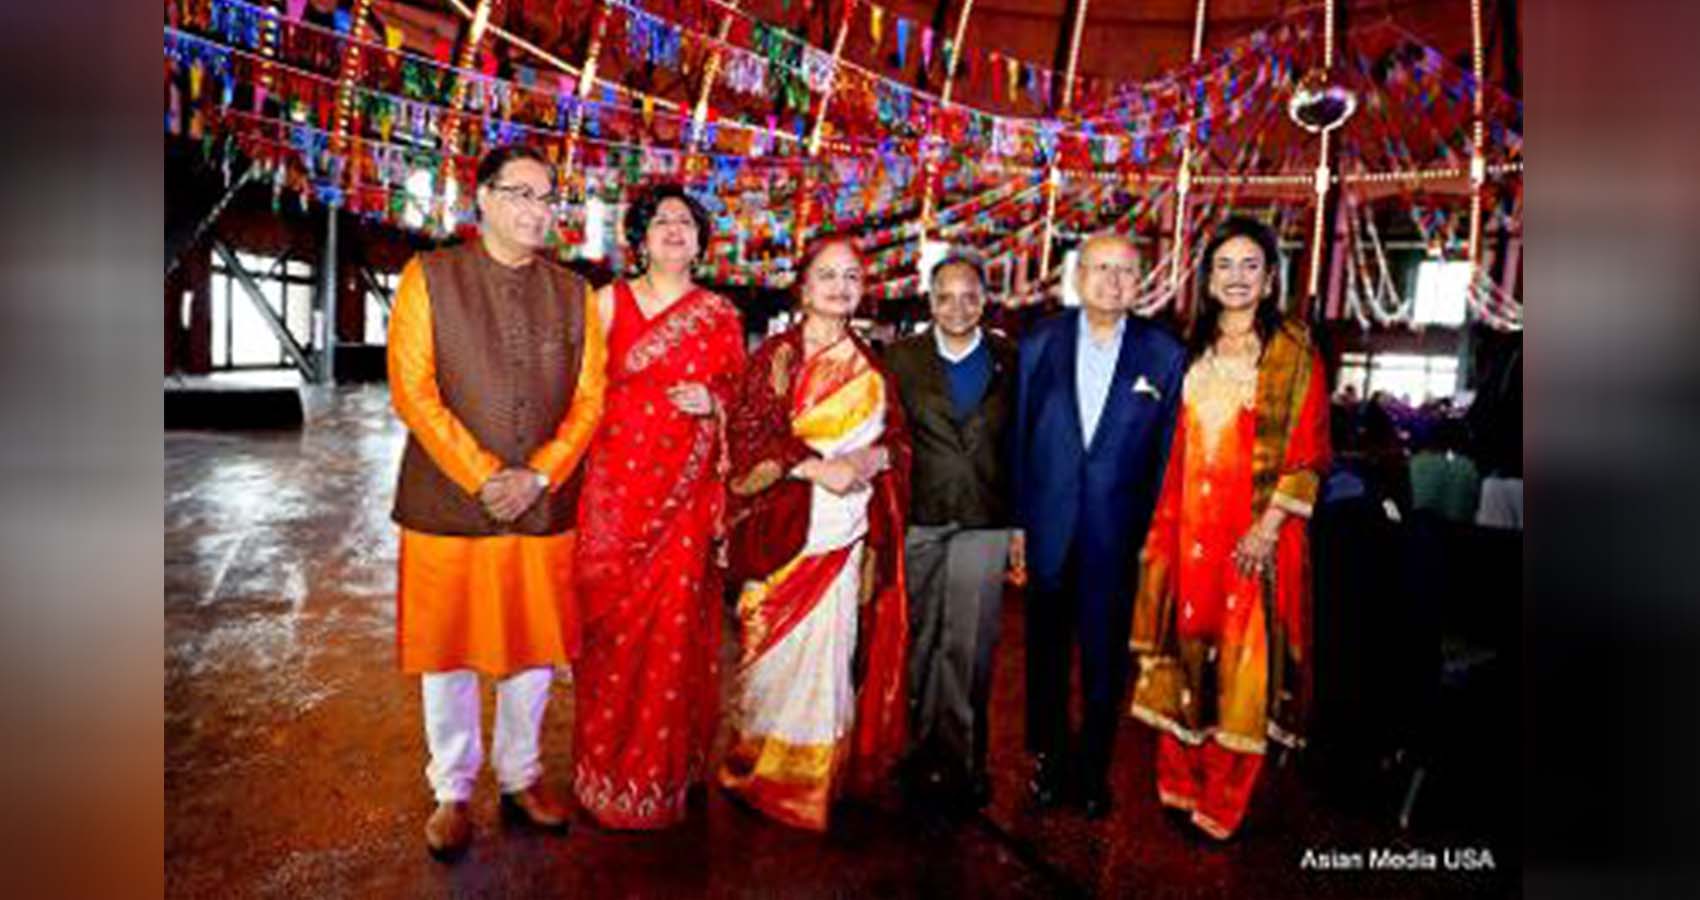 Navy Pier, Delhi committee of Chicago Sister Cities Jointly Celebrate Holi